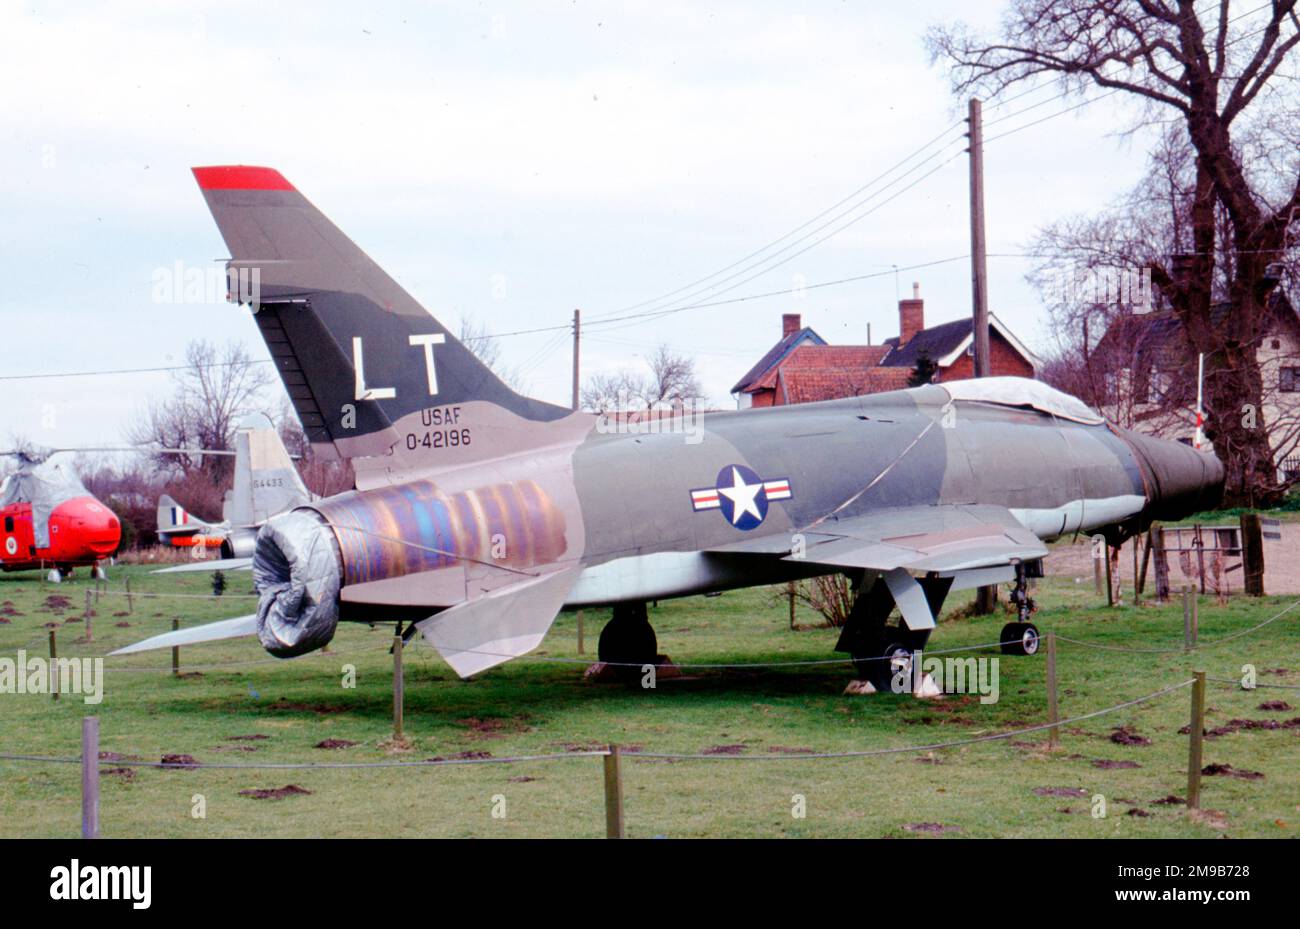 North American F-100D-10-NA Super Sabre 54-2196 (msn 223-76), à Norfolk and Suffolk Aviation Museum, Flixton, Suffolk, Royaume-Uni., en prêt du National Museum of the USAF. Banque D'Images